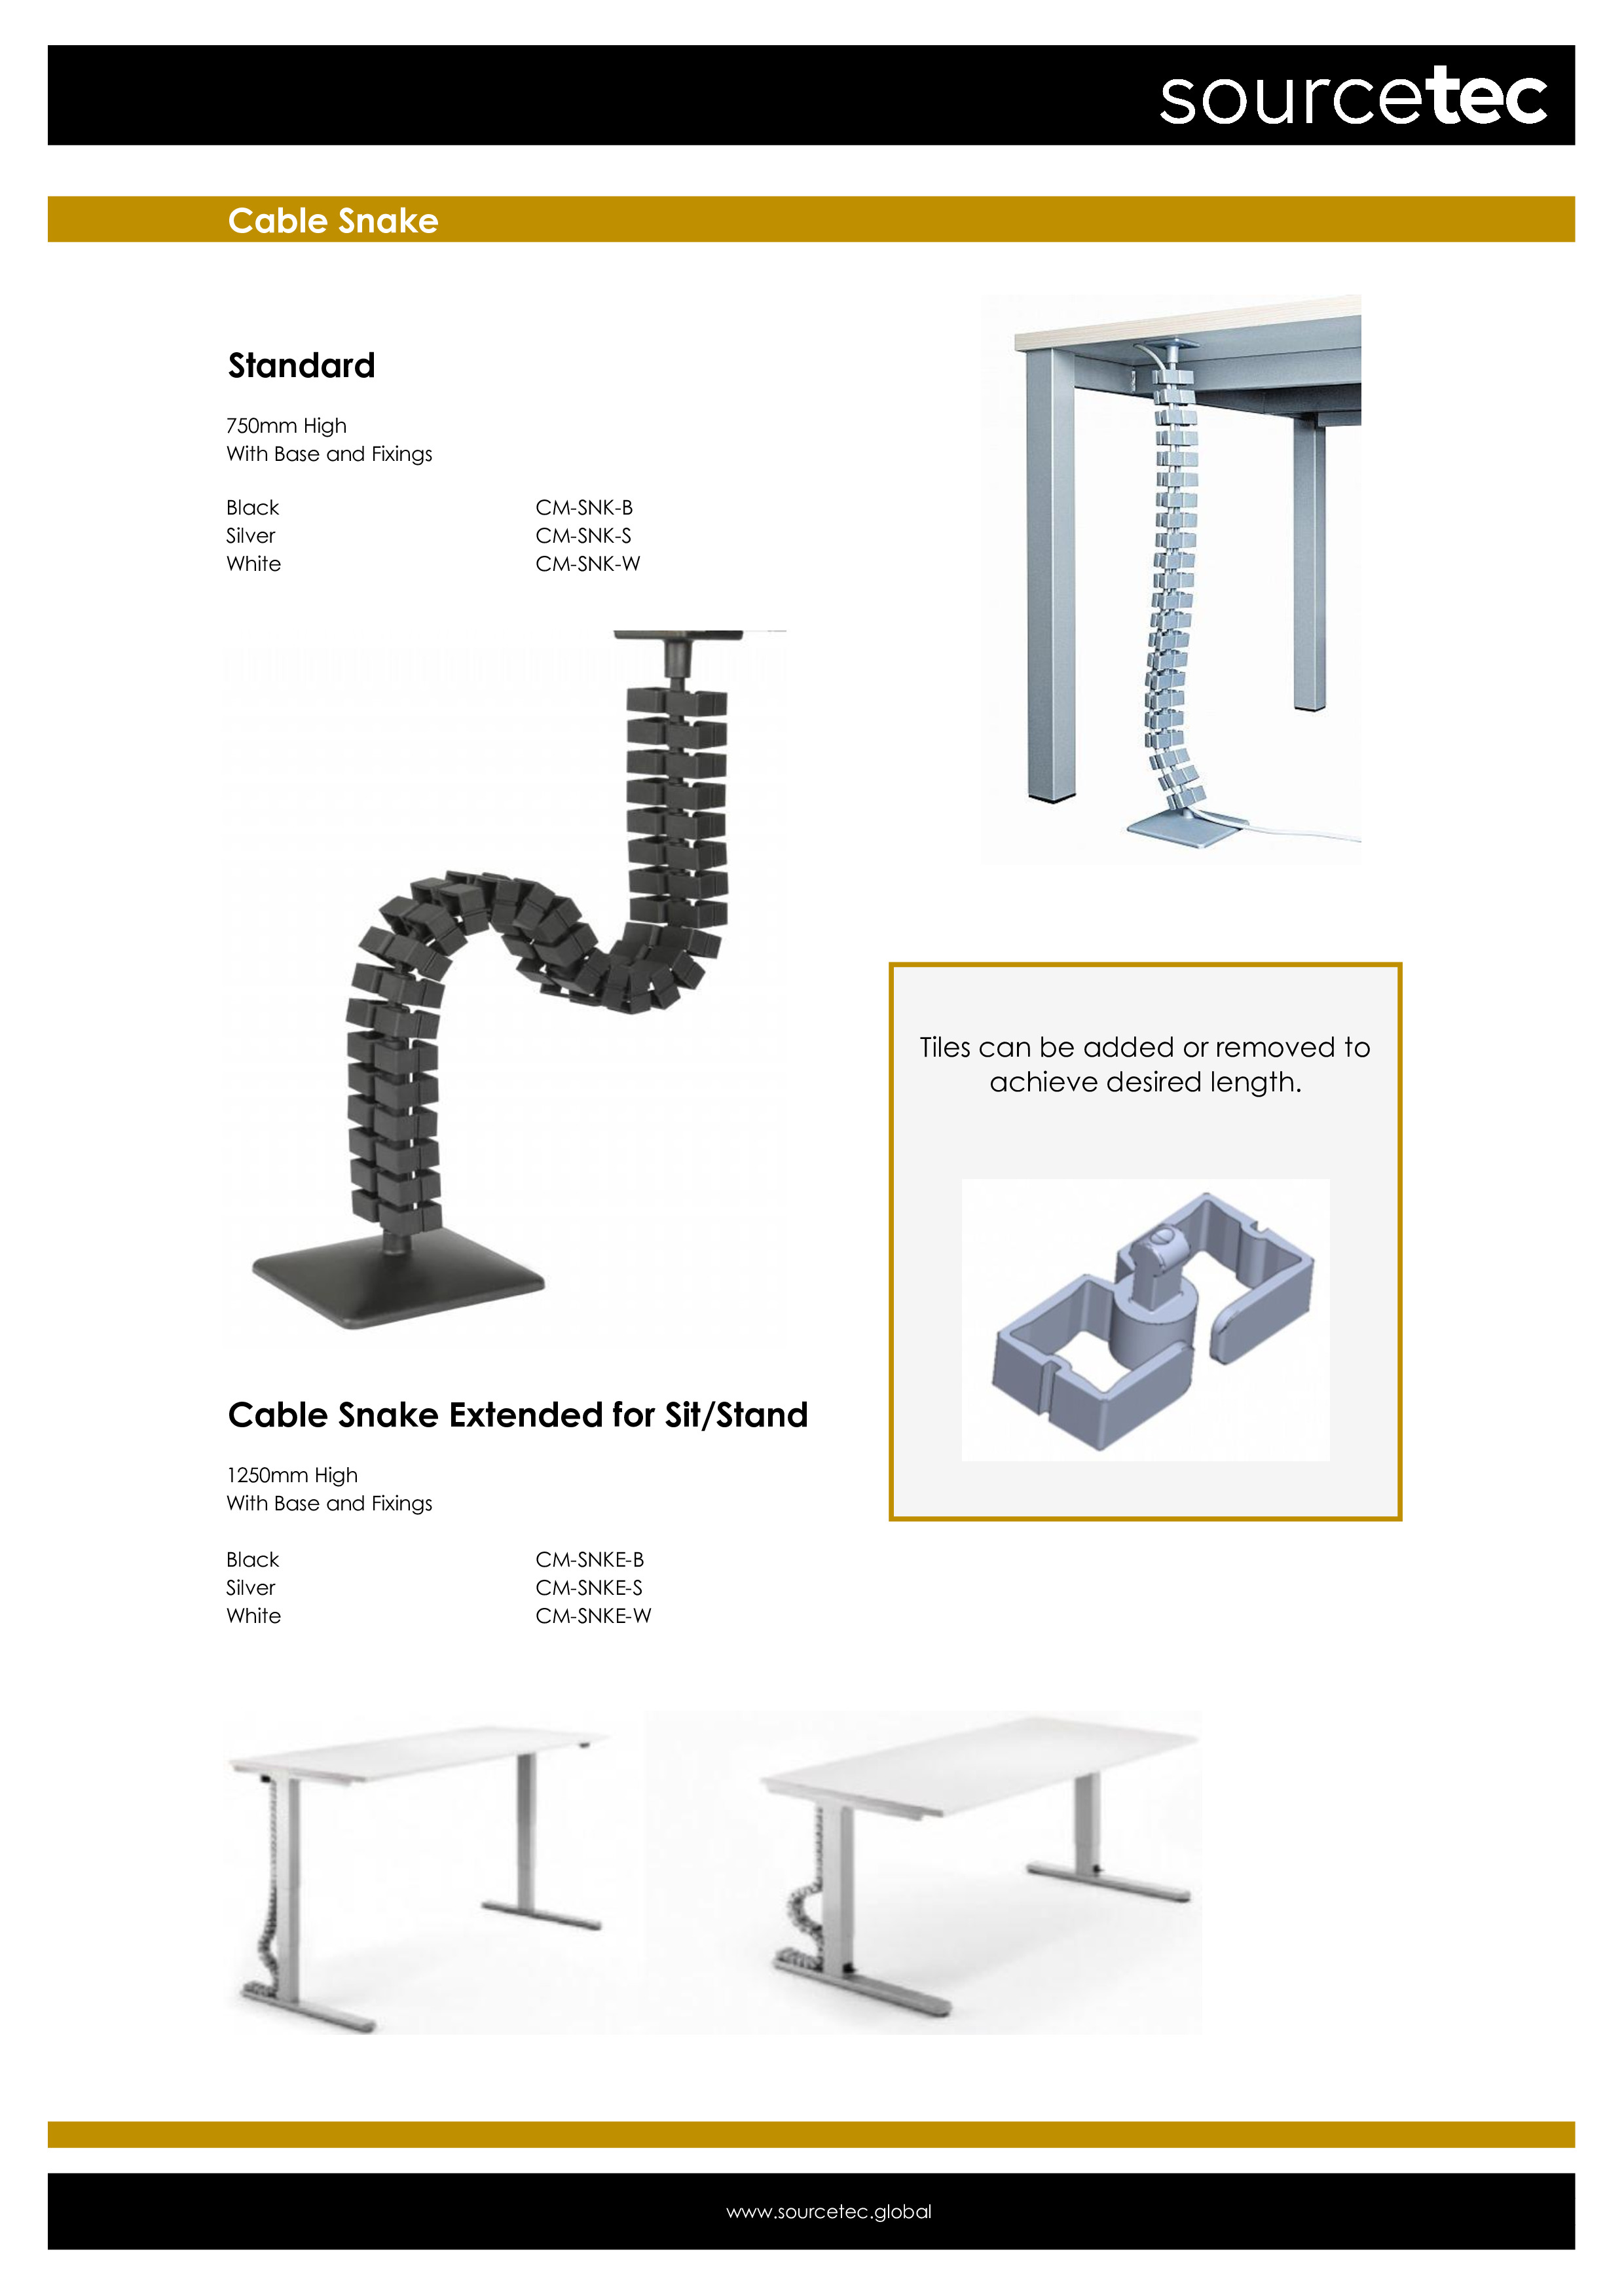 Workstories - Cable Snake - Product Sheet